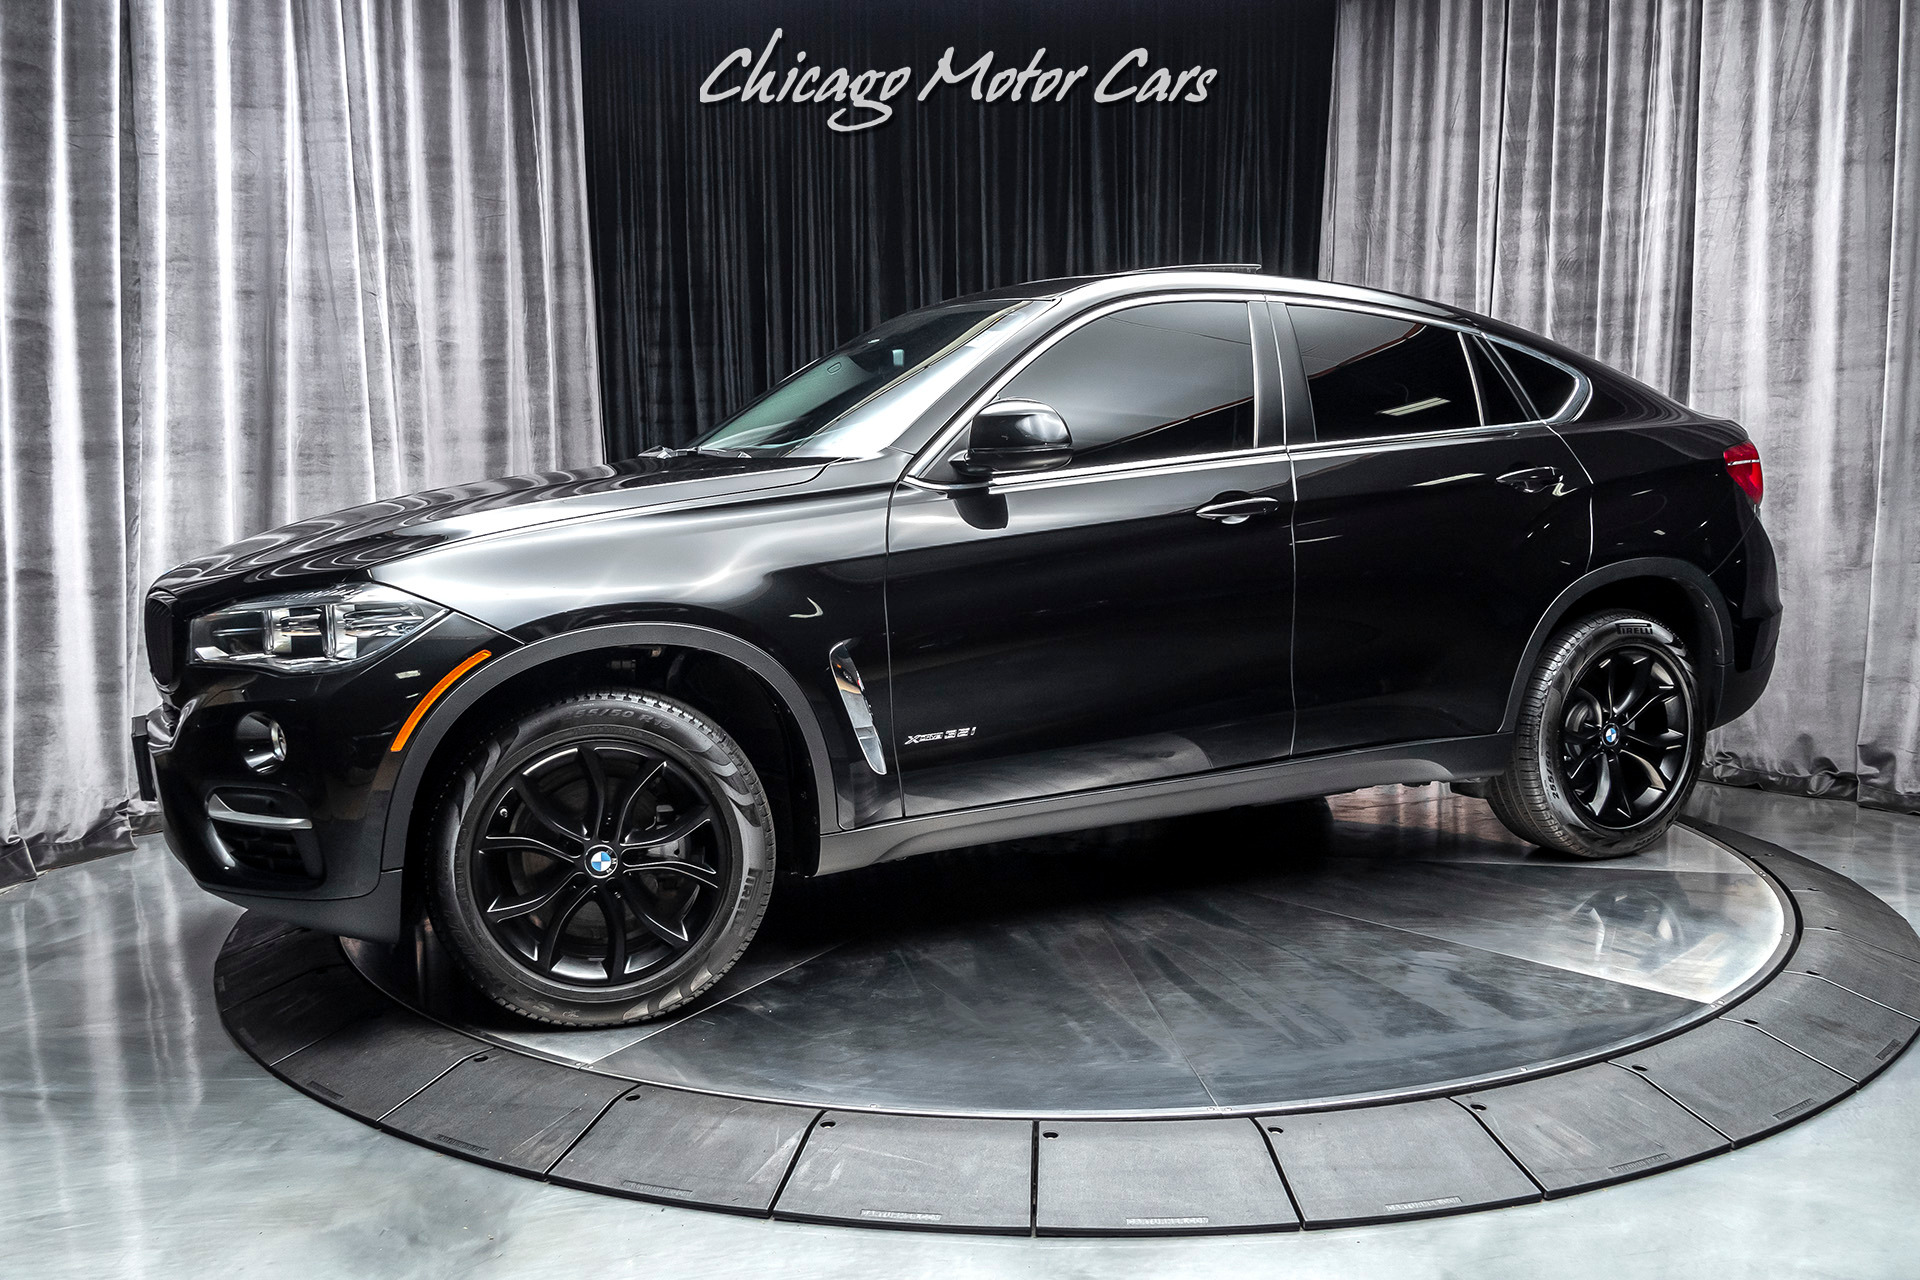 Used 2016 BMW X6 xDrive35i SUV PREMIUM PKG! DRIVER ASSISTANCE PKG! COLD  WEATHER PKG! For Sale (Special Pricing) | Chicago Motor Cars Stock #17007A